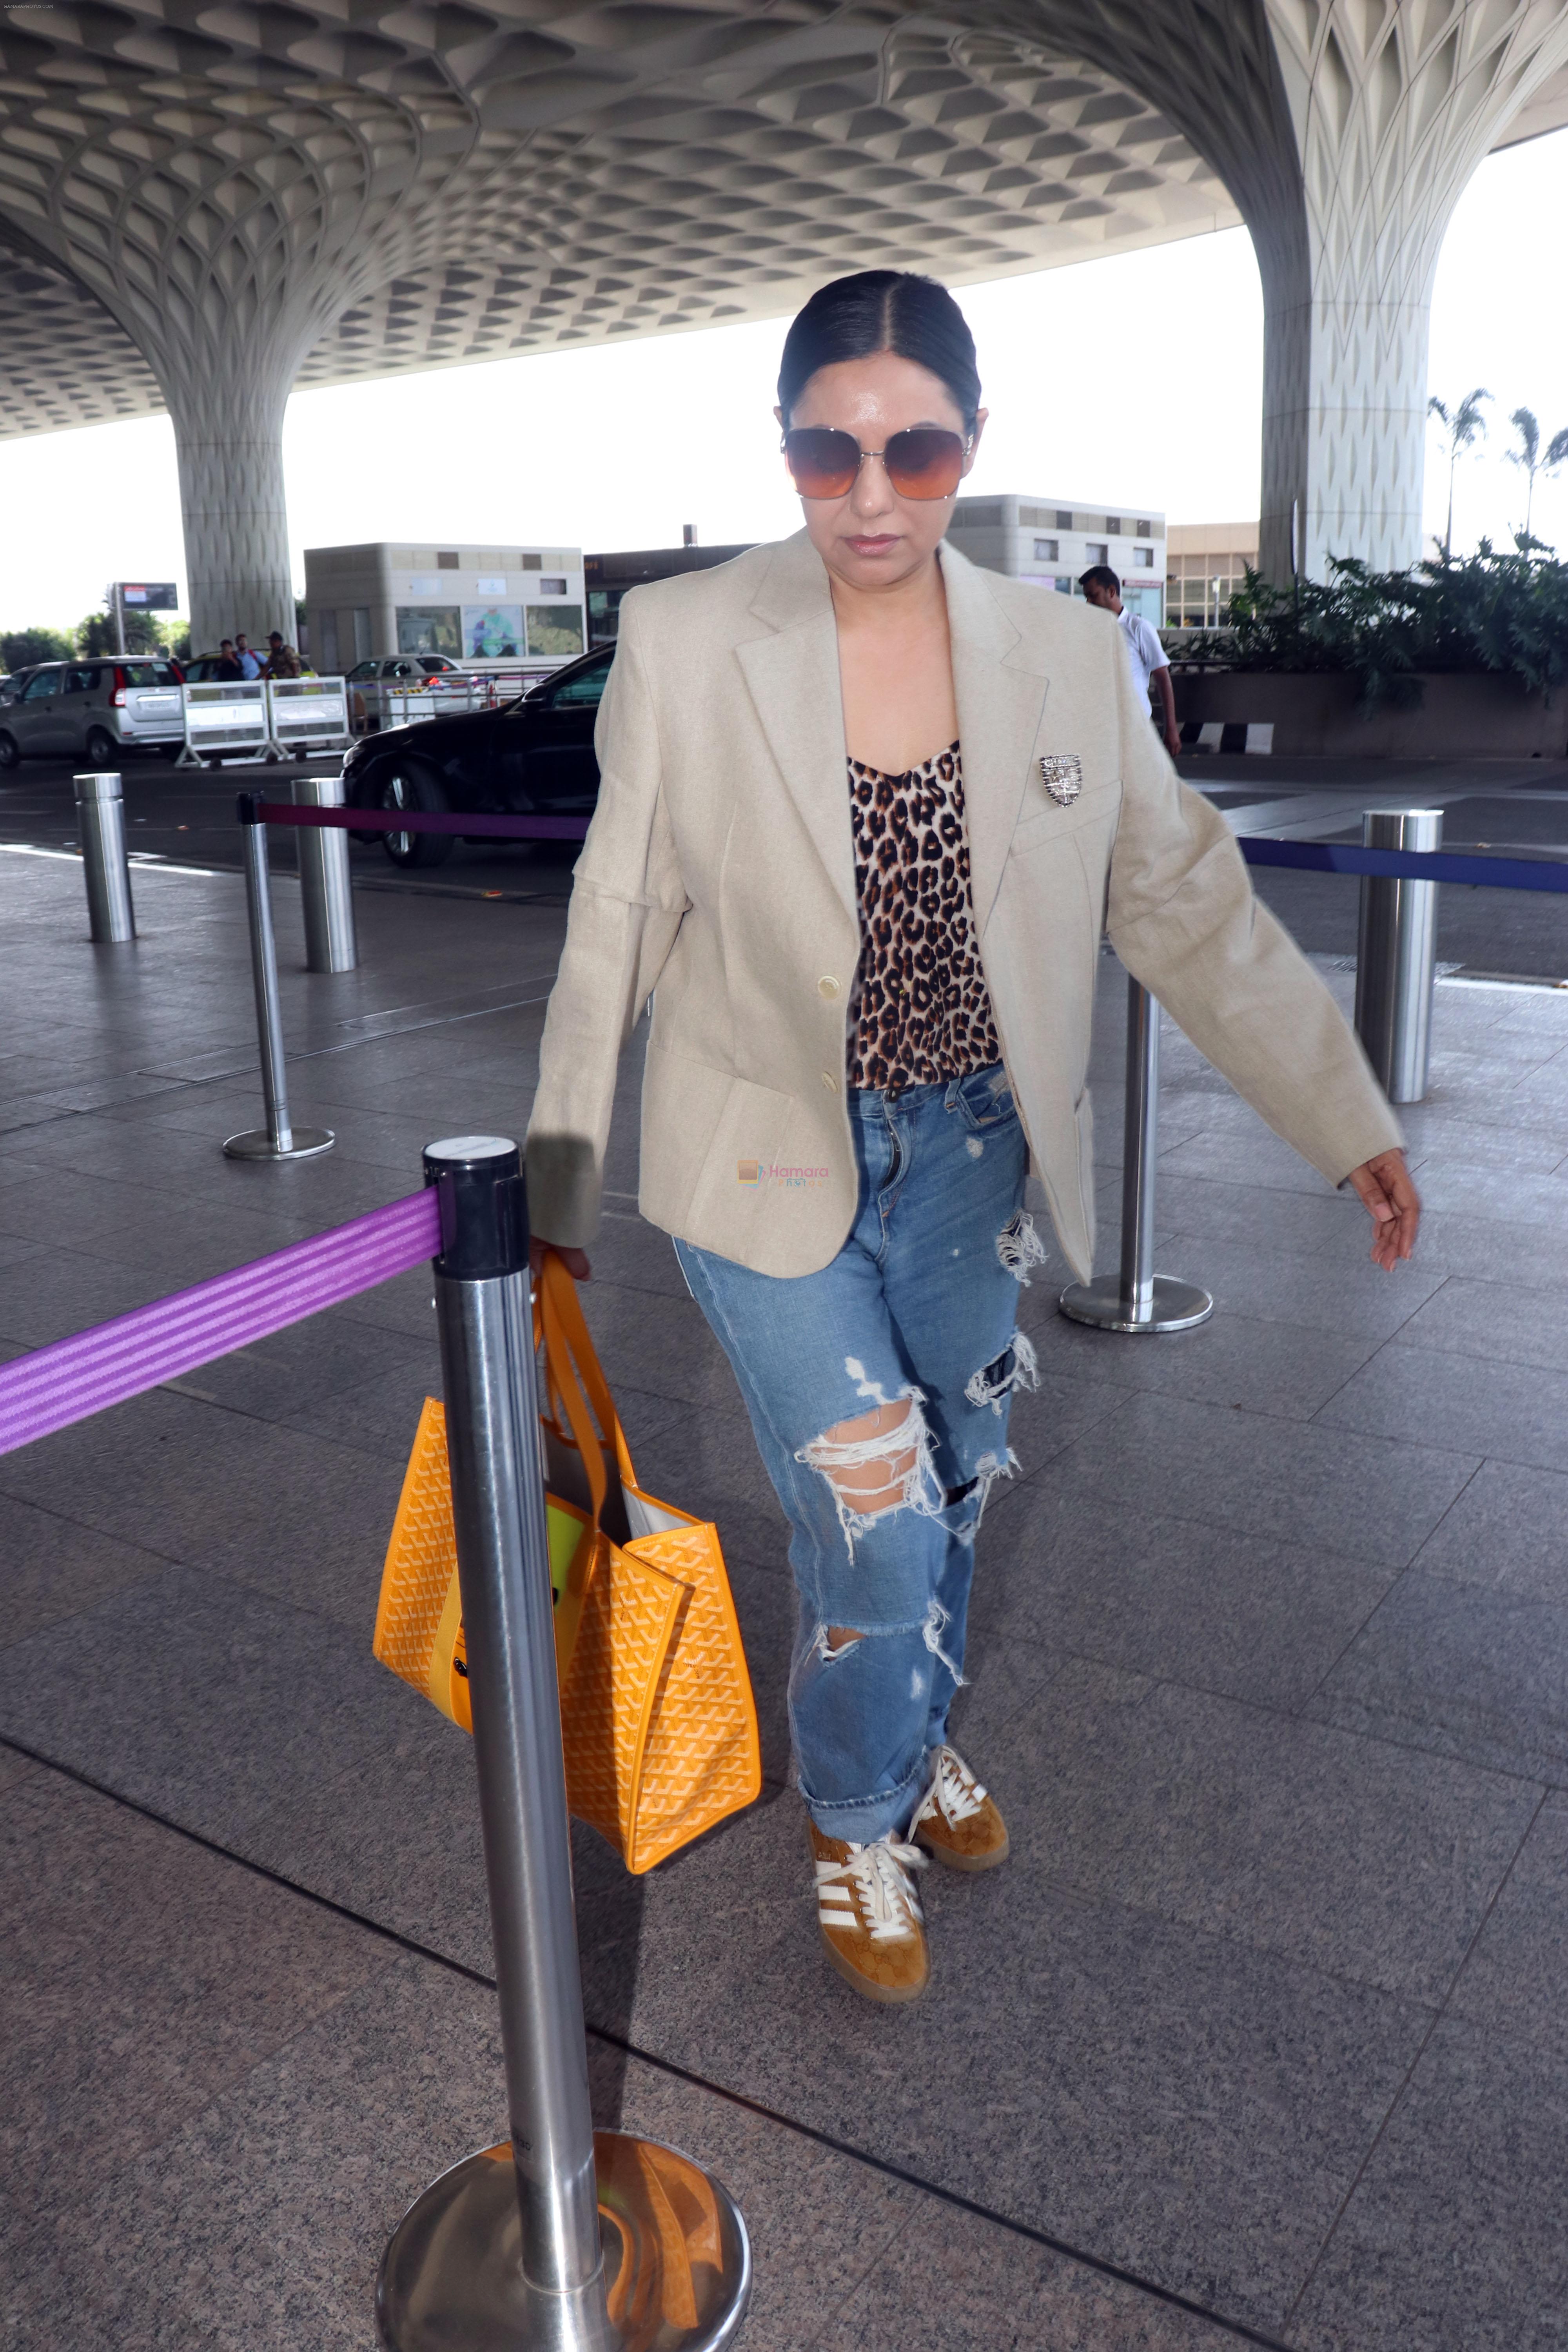 Gauahar Khan holding Villette Tote Bag wearing Gazelle Gucci Mesa White Red shoes, Balmain distressed effect finish jeans, overcoat and sunglasses